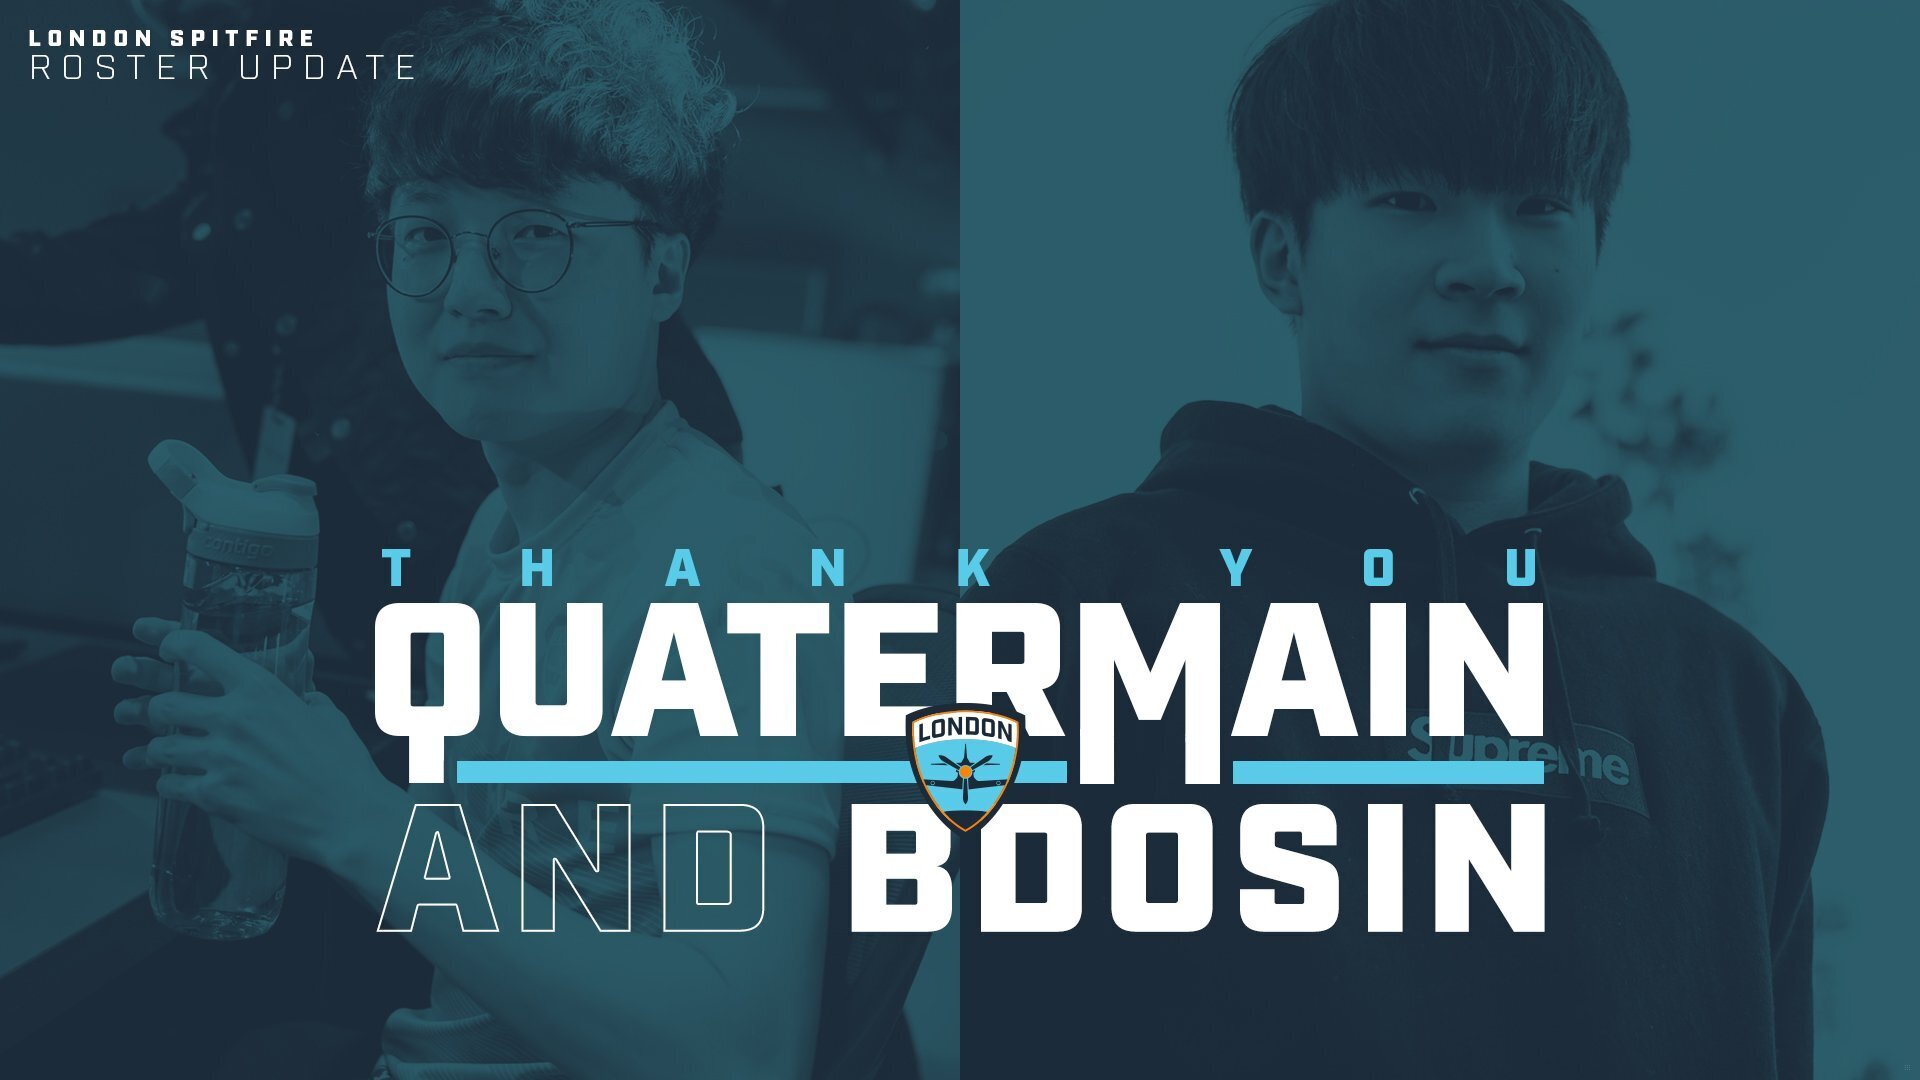 With this release, no player from the London Spitfire's 2018 Grand Champion team remains with the organization (Image via London Spitfire)